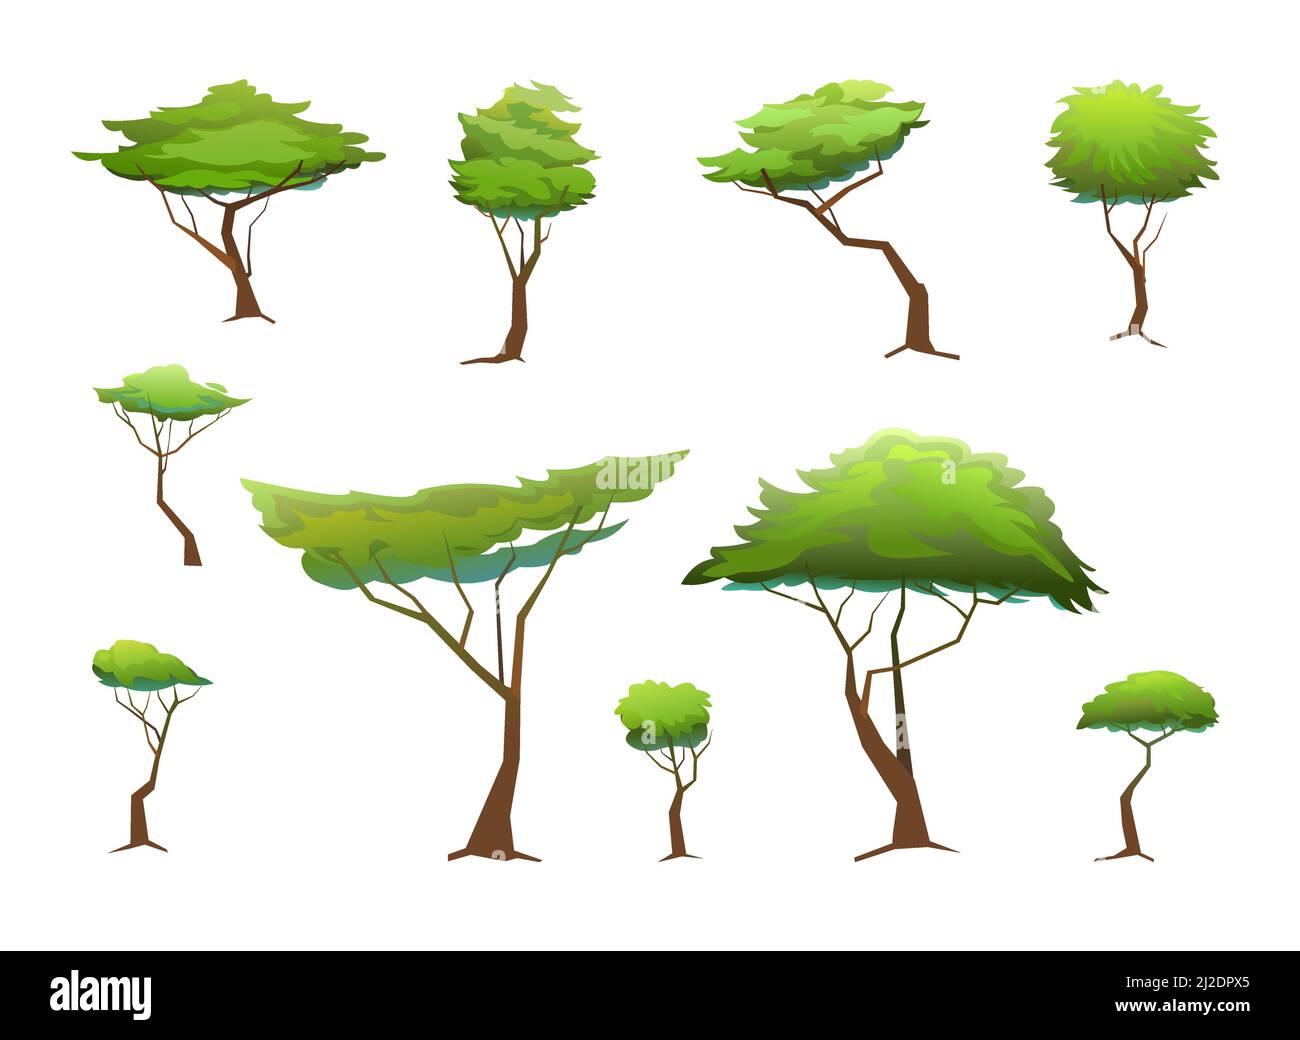 Acacia trees set. Africa savanna plants. African landscape. Isolated on white background. Vector. Stock Vector